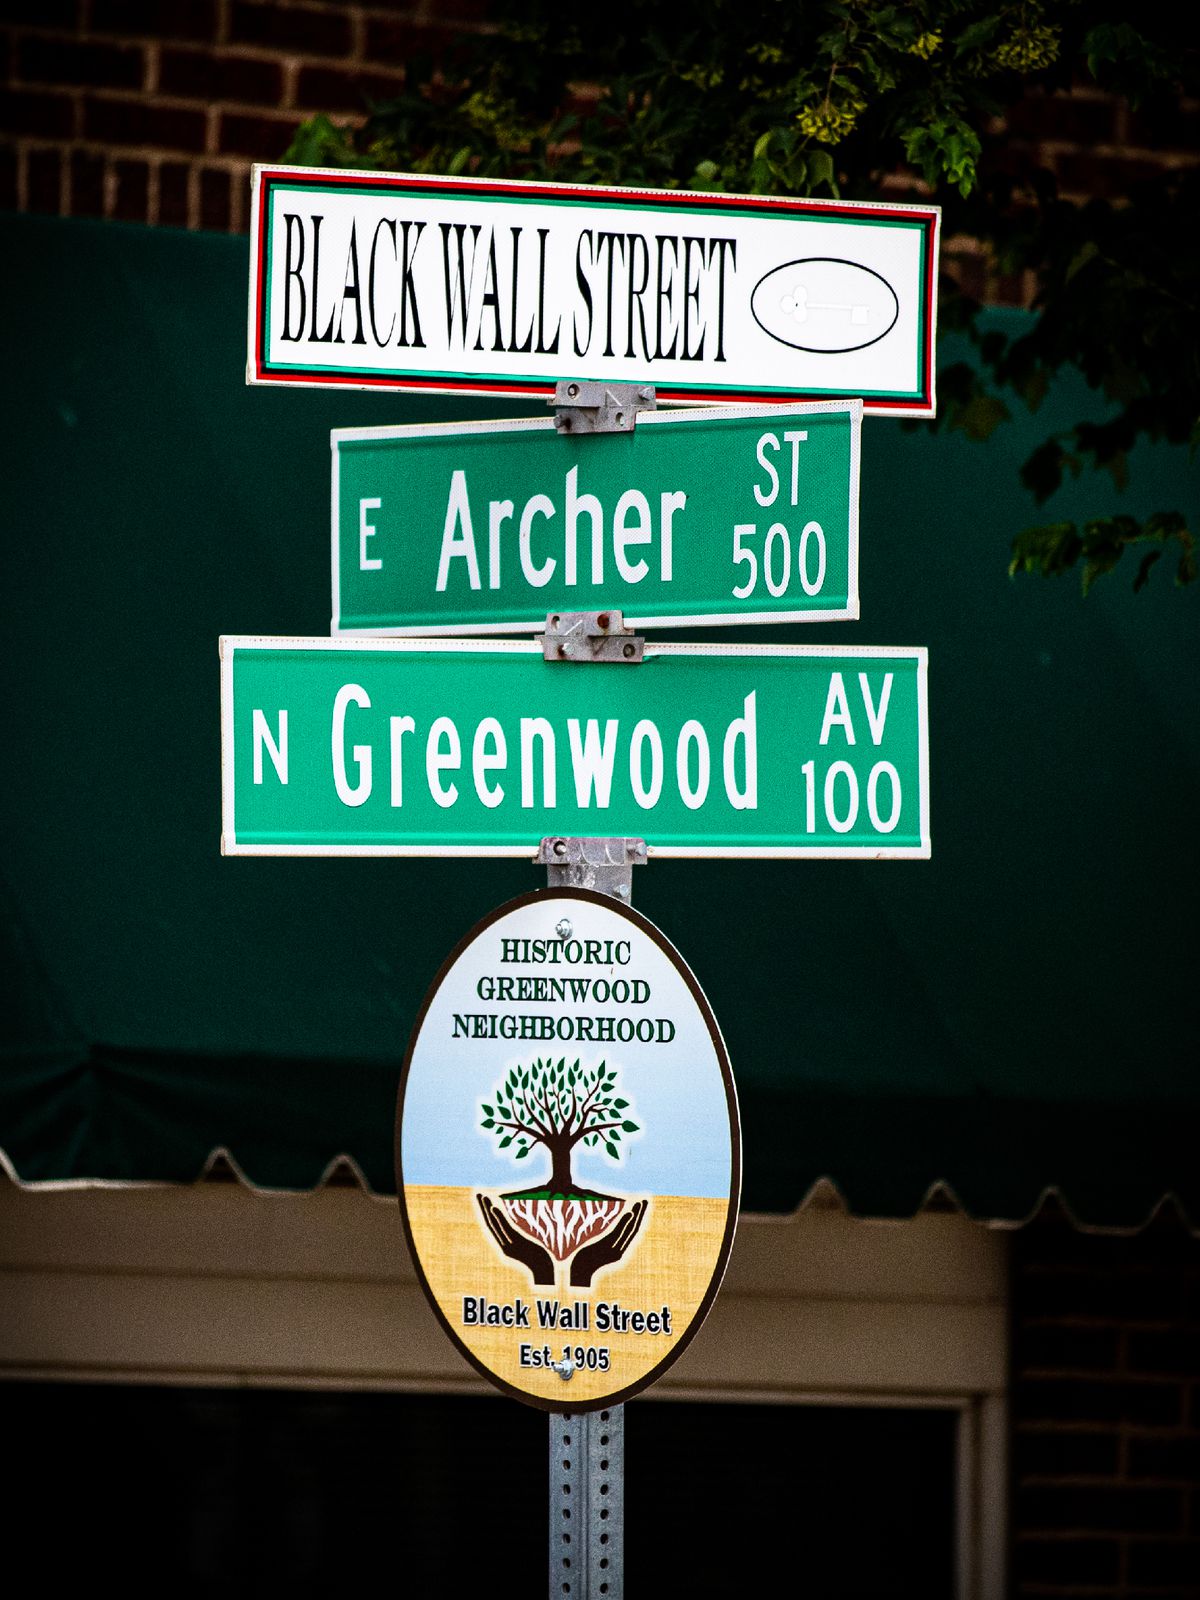 A pole with street signs — Black Wall Street, Archer Street, Greenwood Street — and a plaque that says “Historic Greenwood Neighborhood.”